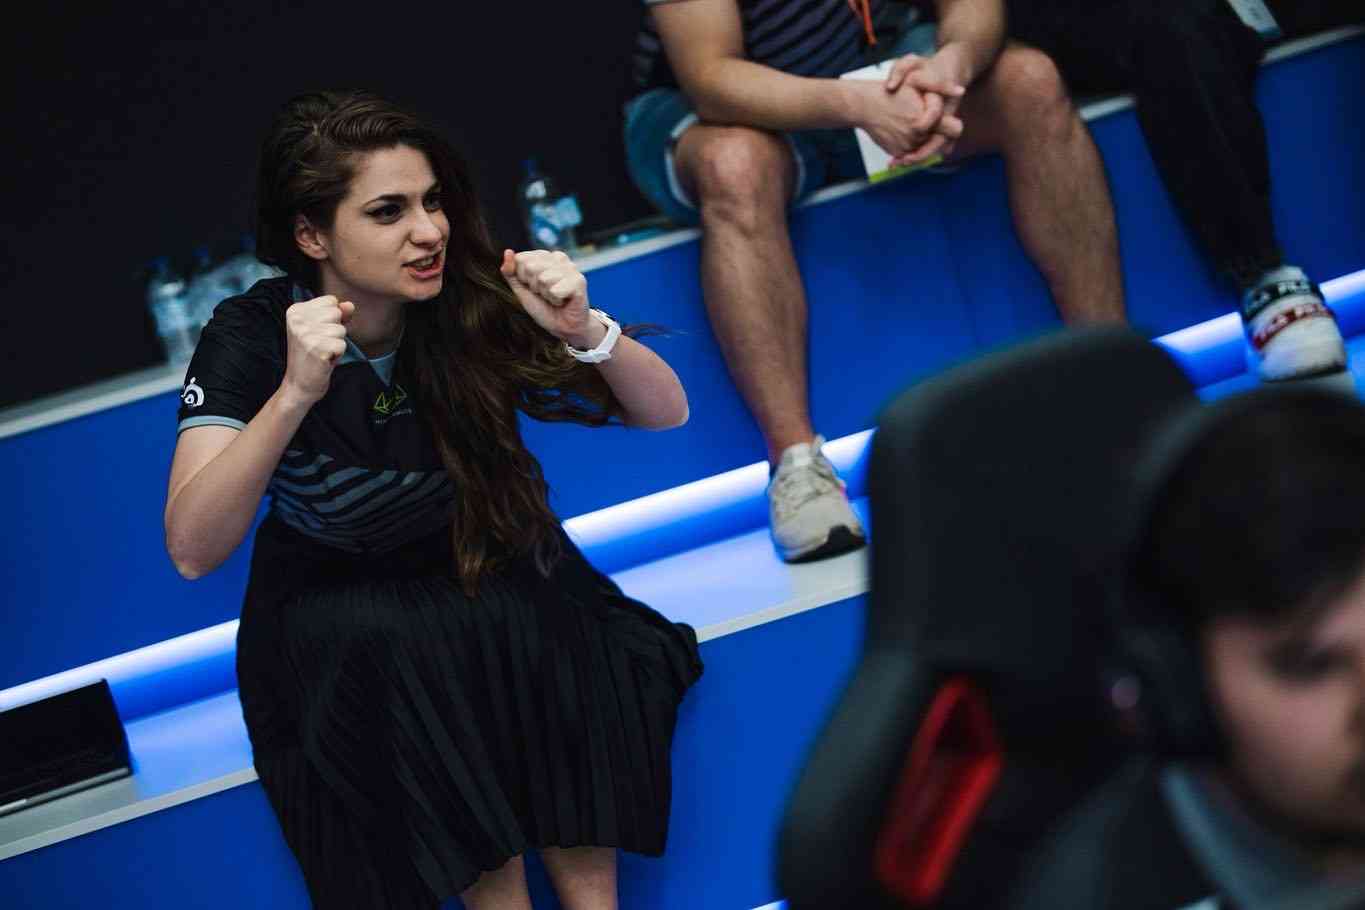 Vladyslava Zakhliebina cheers on her team, OG, while they compete in a live match of CS:GO